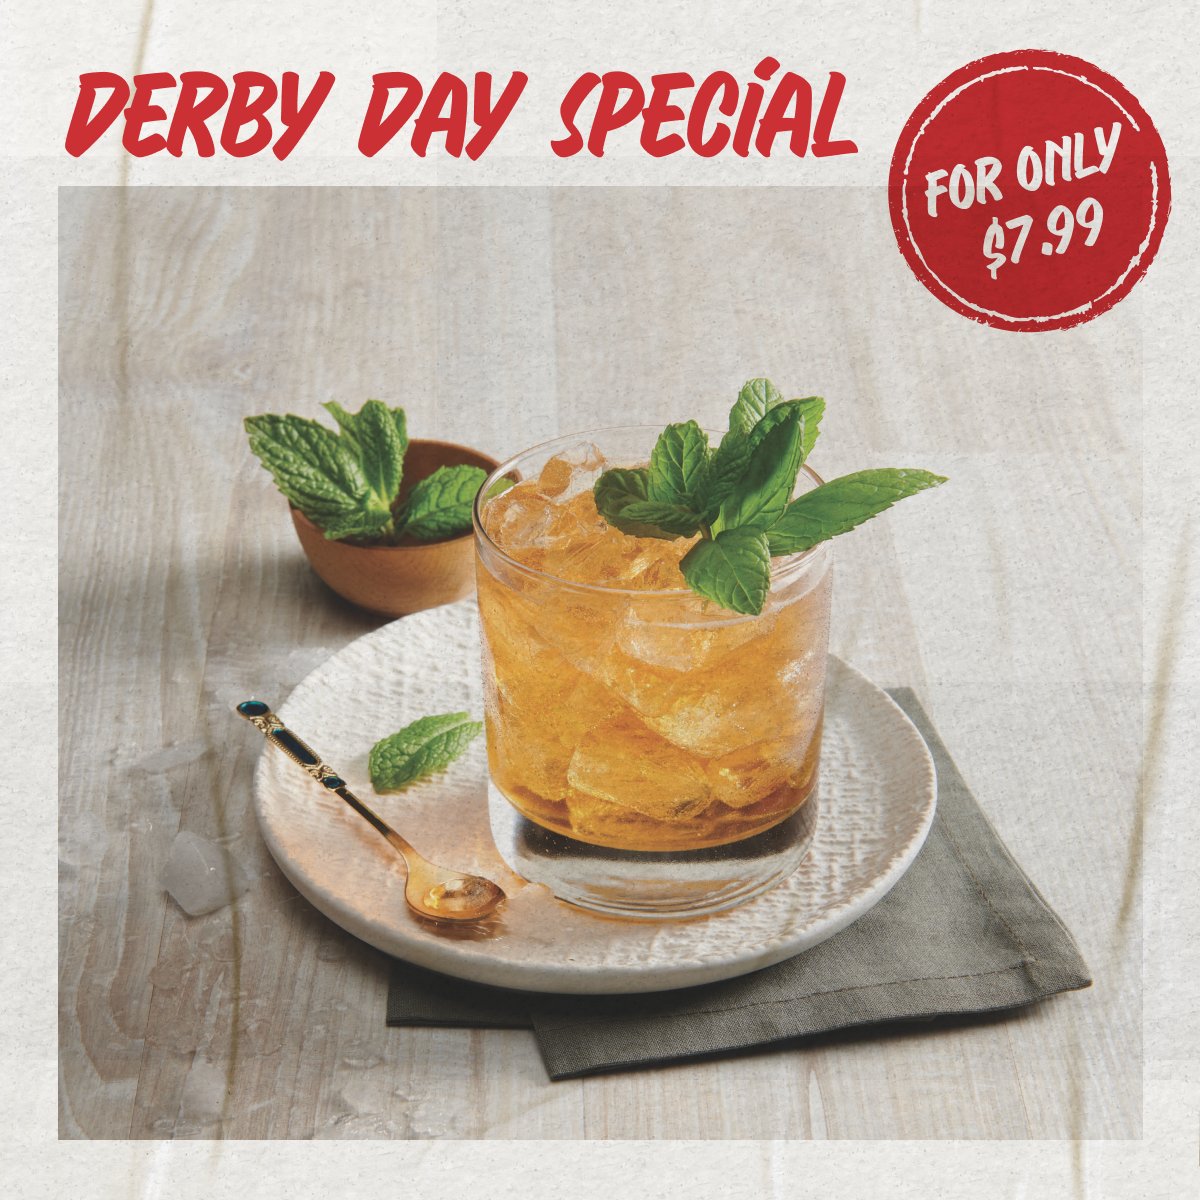 🌹🏇 Saddle up for Derby Day with a Mint Julep for only $7.99! Come by your local Taco Mac so you can enjoy this classic cocktail and watch the race in style!